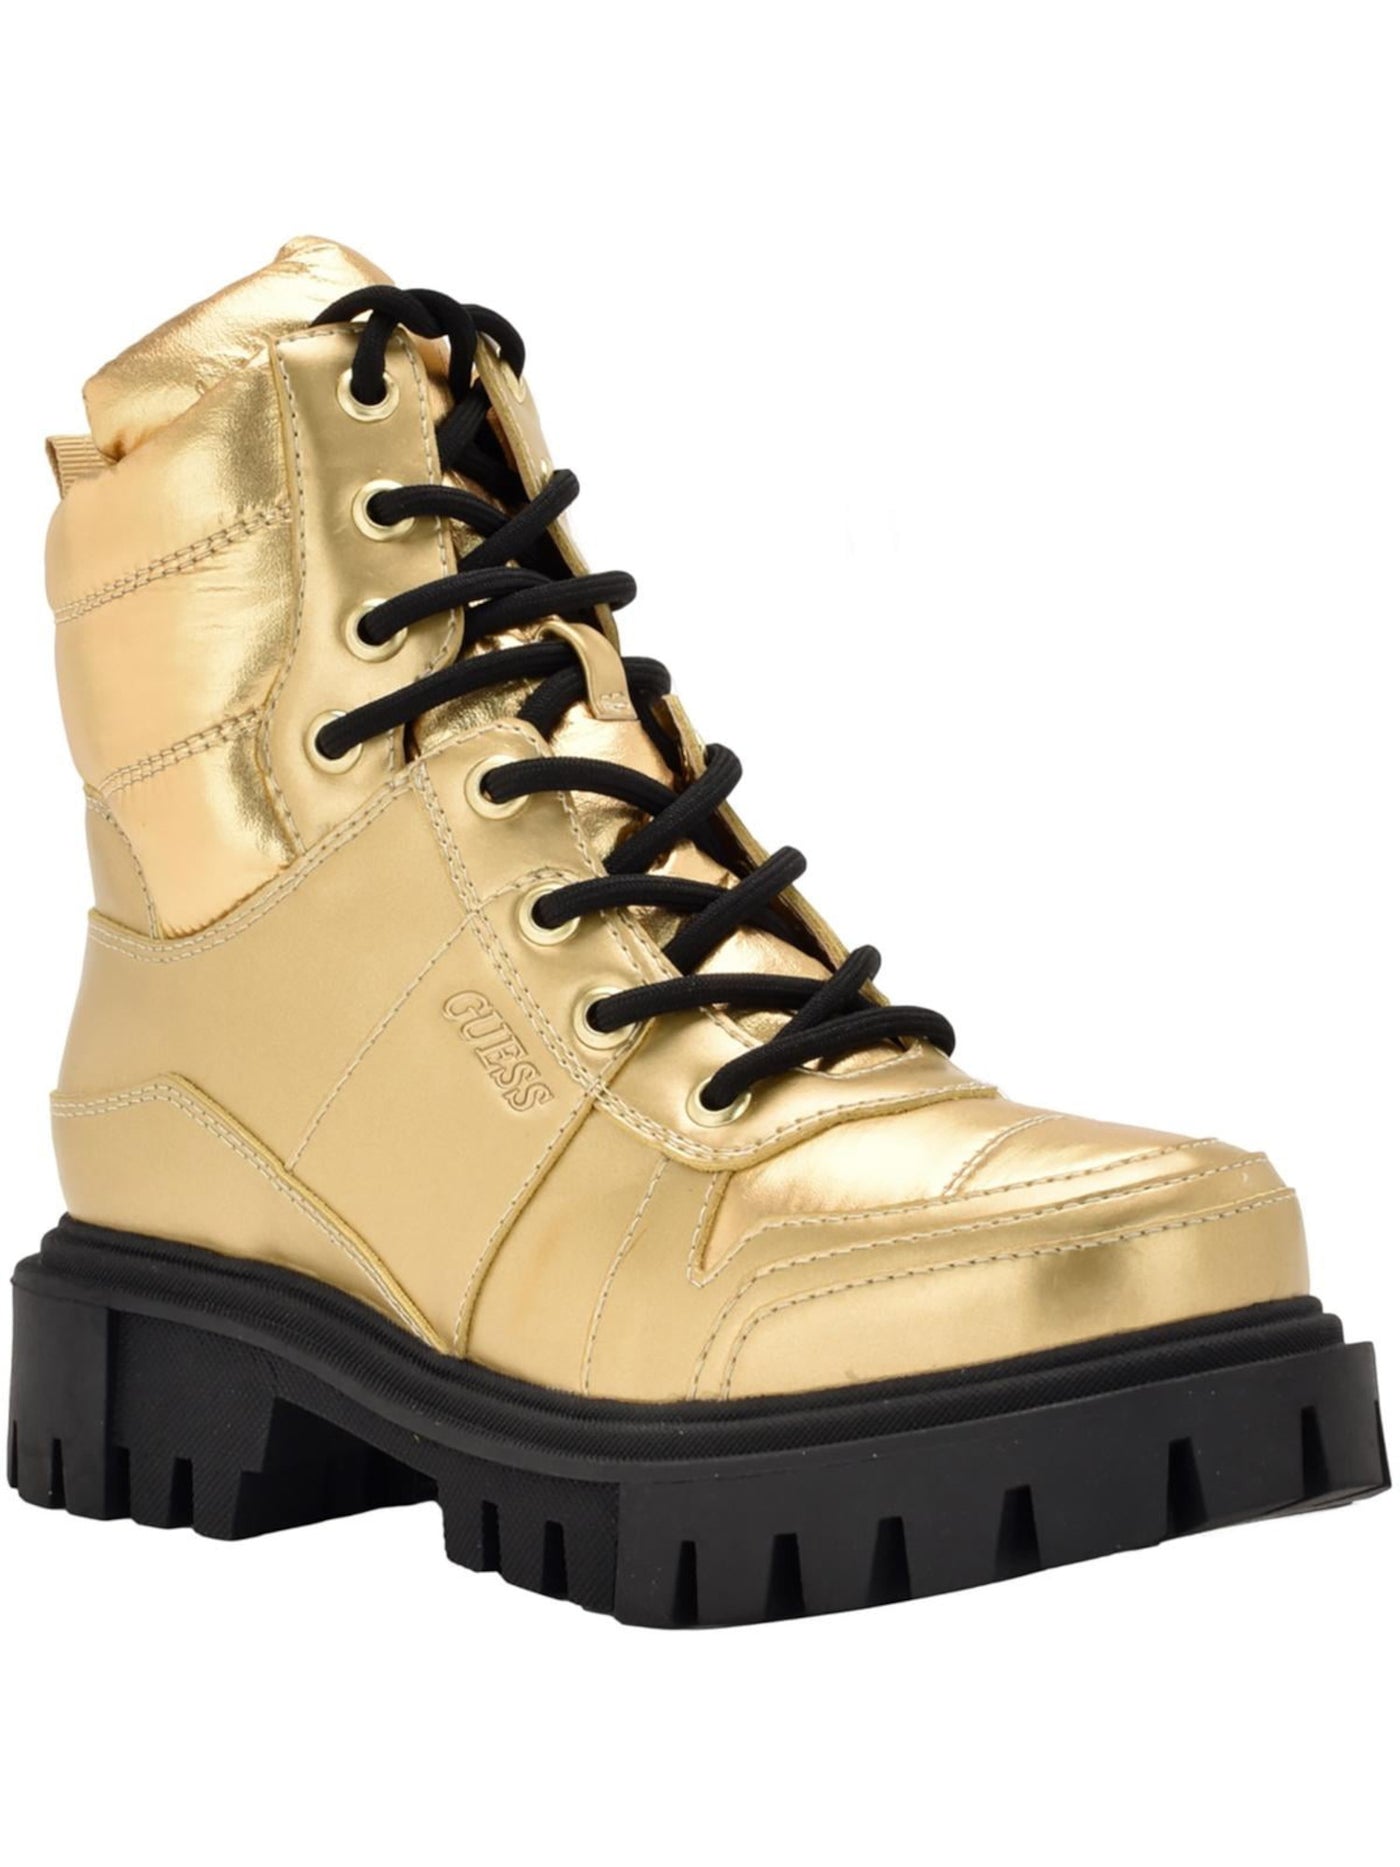 GUESS Womens Gold 1" Platform Back Pull-Tab Lug Sole Padded Tisley Round Toe Block Heel Lace-Up Combat Boots 7 M